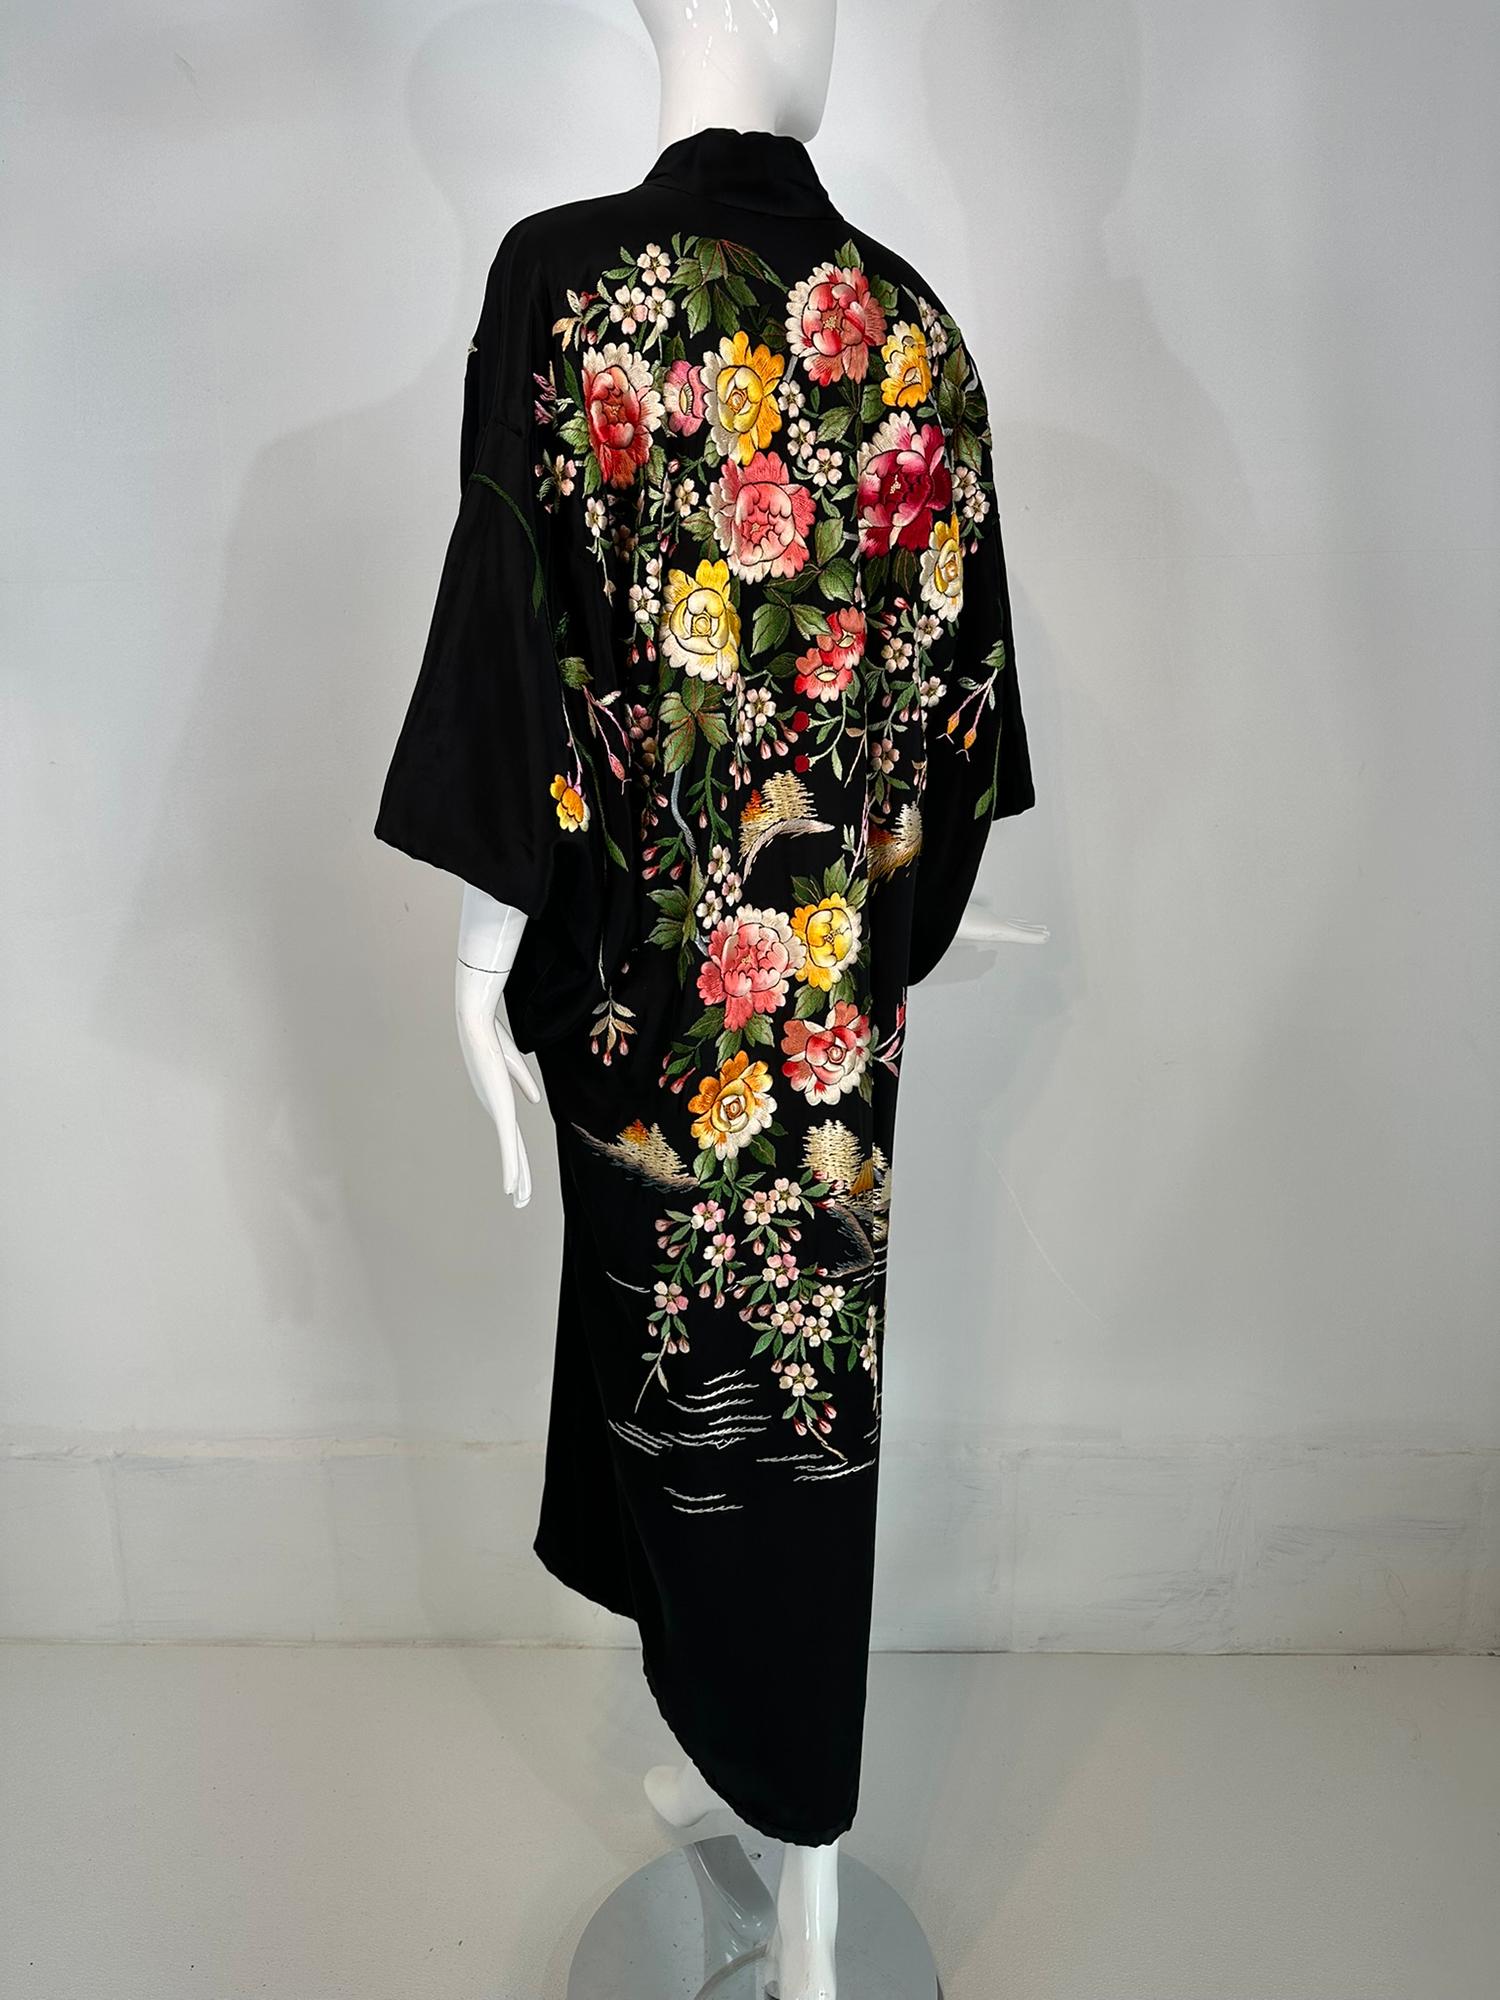 Vintage Black Rayon Heavily Floral Embroidered Kimono Robe 1930s-40s For Sale 1